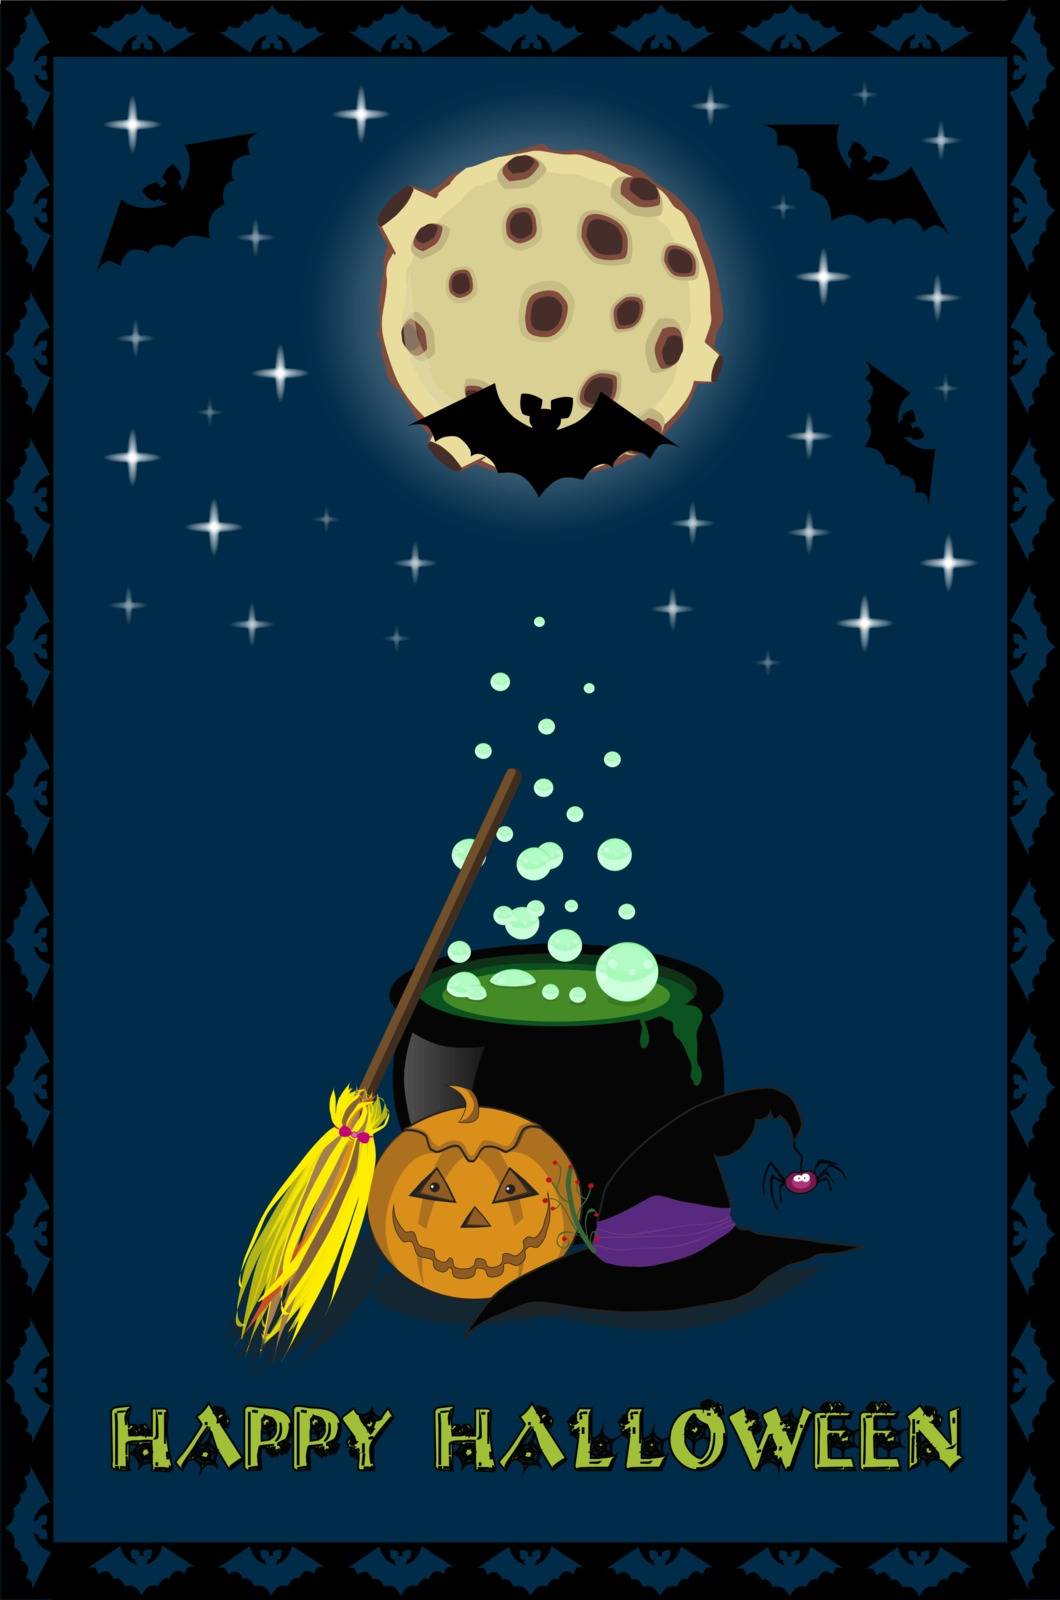 Vector illustration of witch stuff on full moon background by Katarepsius